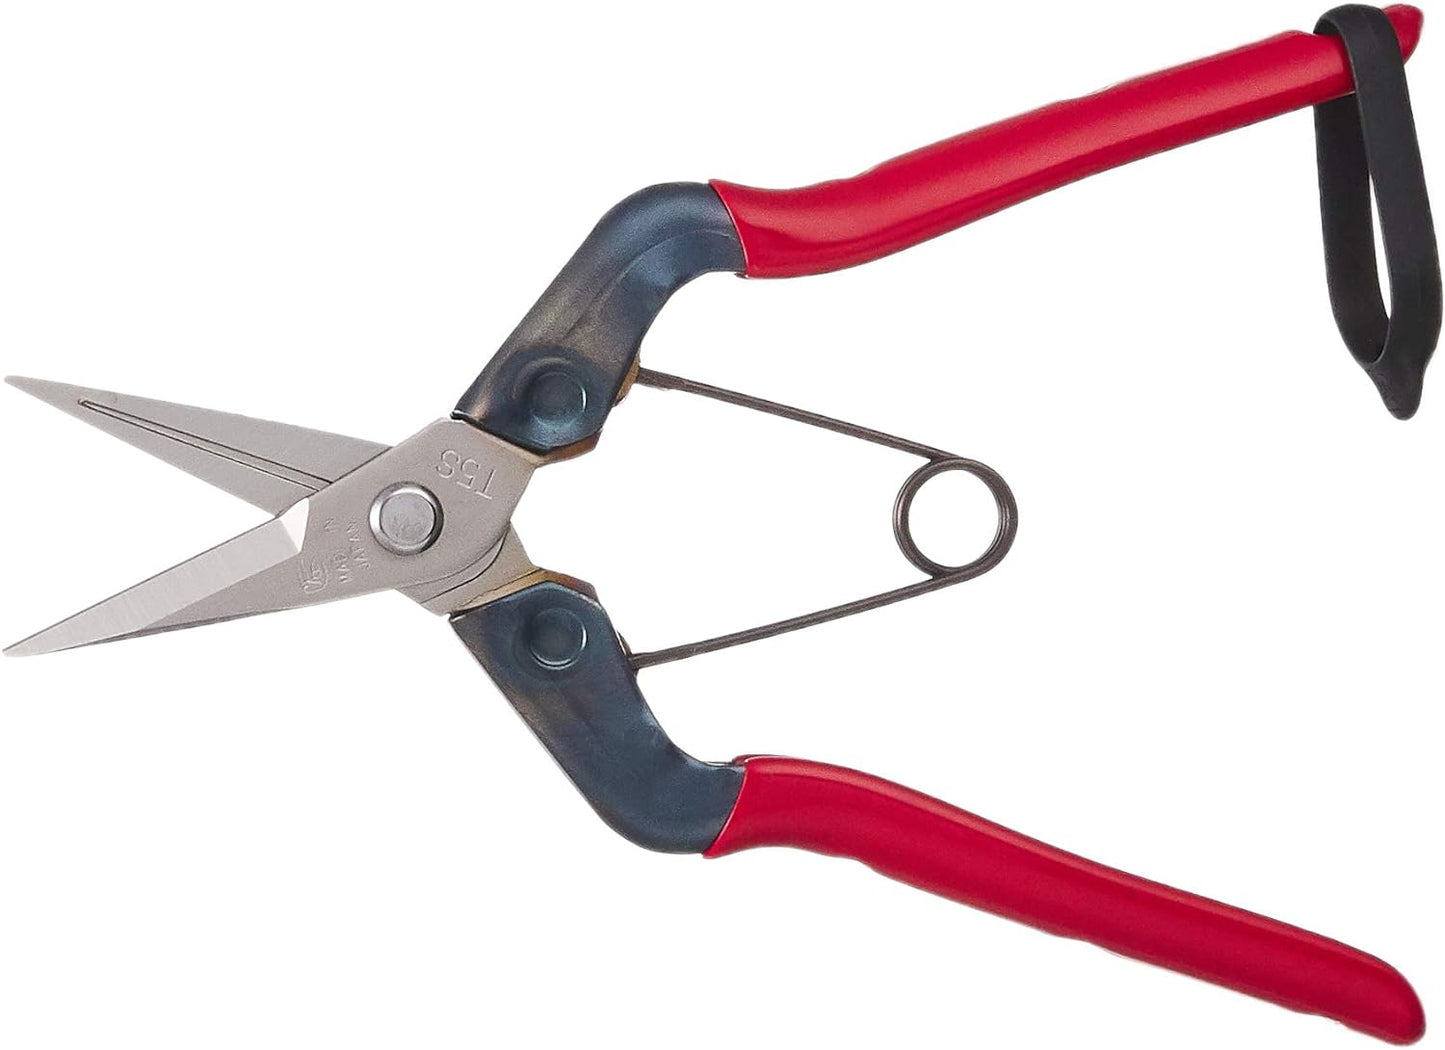 Chikamasa T-500S Japanese Carbon Steel Trimming Shears